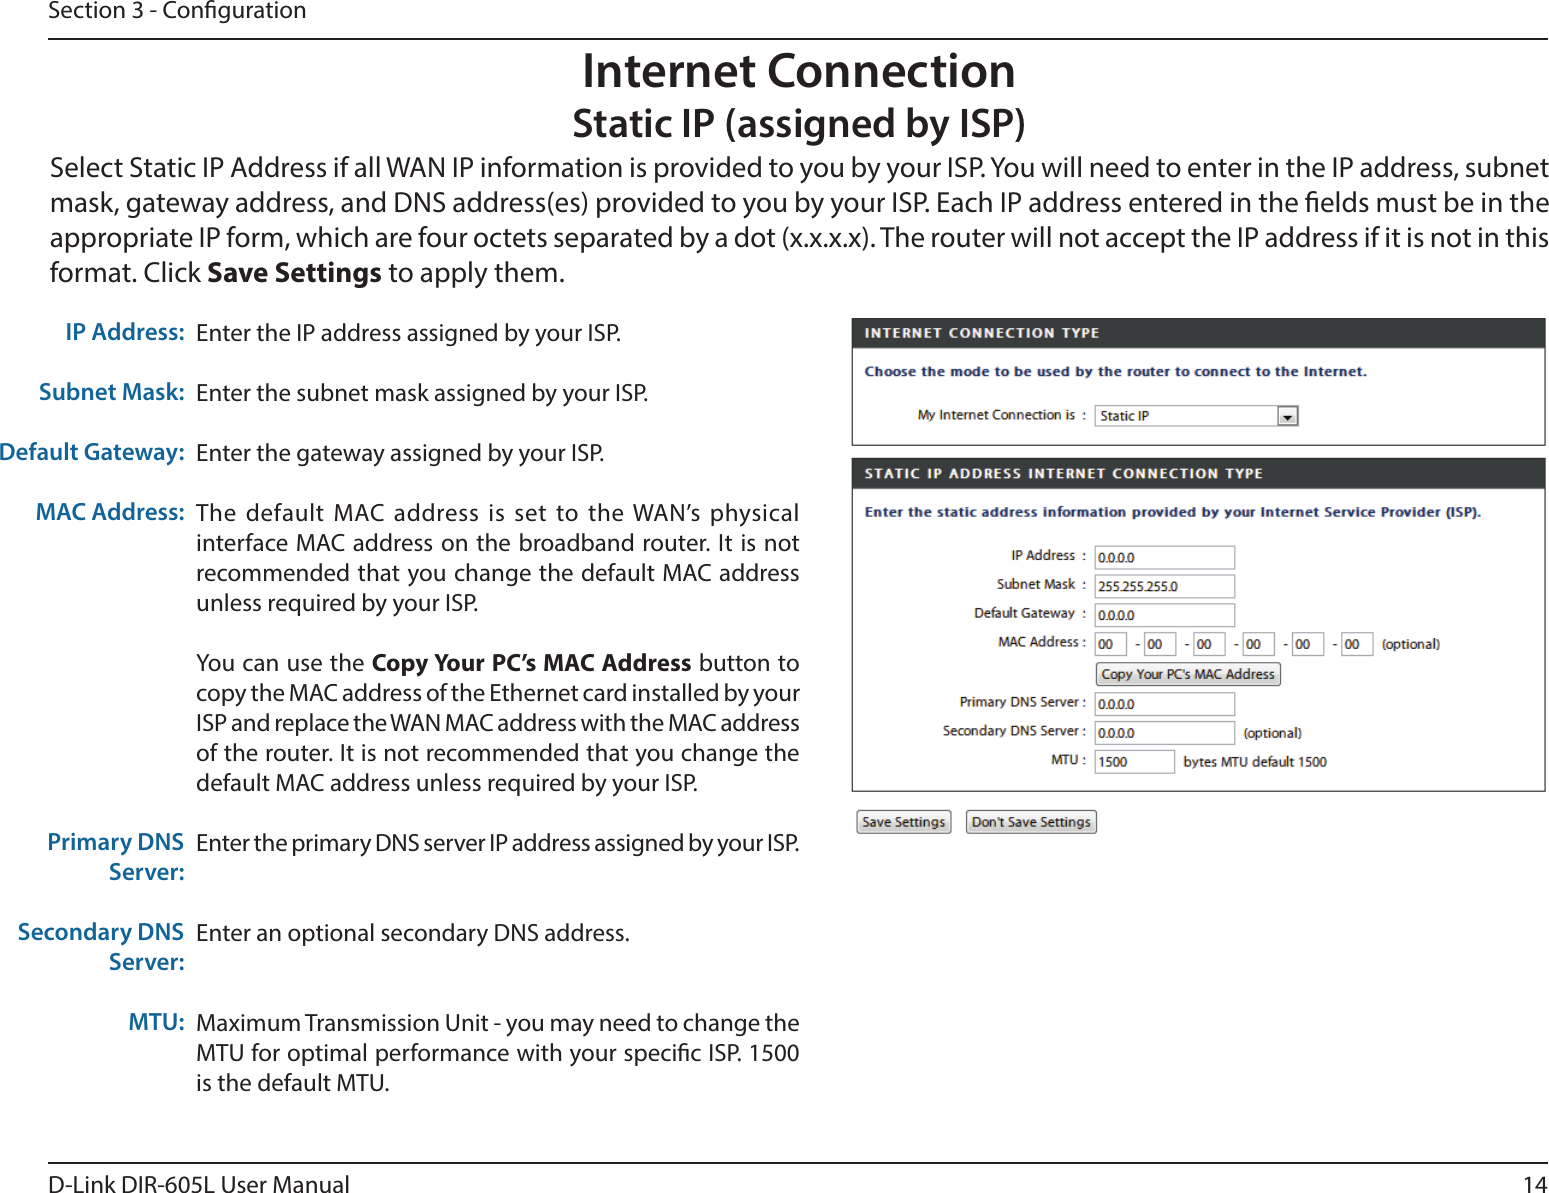 14D-Link DIR-605L User ManualSection 3 - CongurationEnter the IP address assigned by your ISP.Enter the subnet mask assigned by your ISP.Enter the gateway assigned by your ISP.The default MAC address is set to the WAN’s physical interface MAC address on the broadband router. It is not recommended that you change the default MAC address unless required by your ISP.You can use the Copy Your PC’s MAC Address button to copy the MAC address of the Ethernet card installed by your ISP and replace the WAN MAC address with the MAC address of the router. It is not recommended that you change the default MAC address unless required by your ISP.Enter the primary DNS server IP address assigned by your ISP.Enter an optional secondary DNS address.Maximum Transmission Unit - you may need to change the MTU for optimal performance with your specic ISP. 1500 is the default MTU.IP Address:Subnet Mask:Default Gateway:MAC Address:Primary DNS Server:Secondary DNS Server:MTU:Internet ConnectionStatic IP (assigned by ISP)Select Static IP Address if all WAN IP information is provided to you by your ISP. You will need to enter in the IP address, subnet mask, gateway address, and DNS address(es) provided to you by your ISP. Each IP address entered in the elds must be in the appropriate IP form, which are four octets separated by a dot (x.x.x.x). The router will not accept the IP address if it is not in this format. Click Save Settings to apply them.